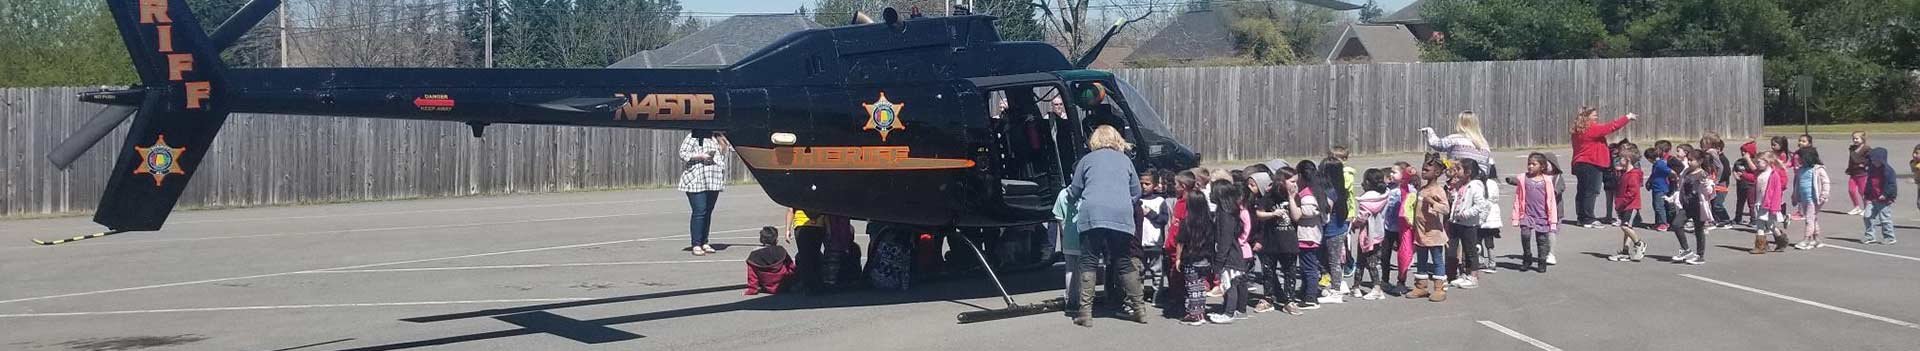 School children getting to look at the Sheriff helicopter